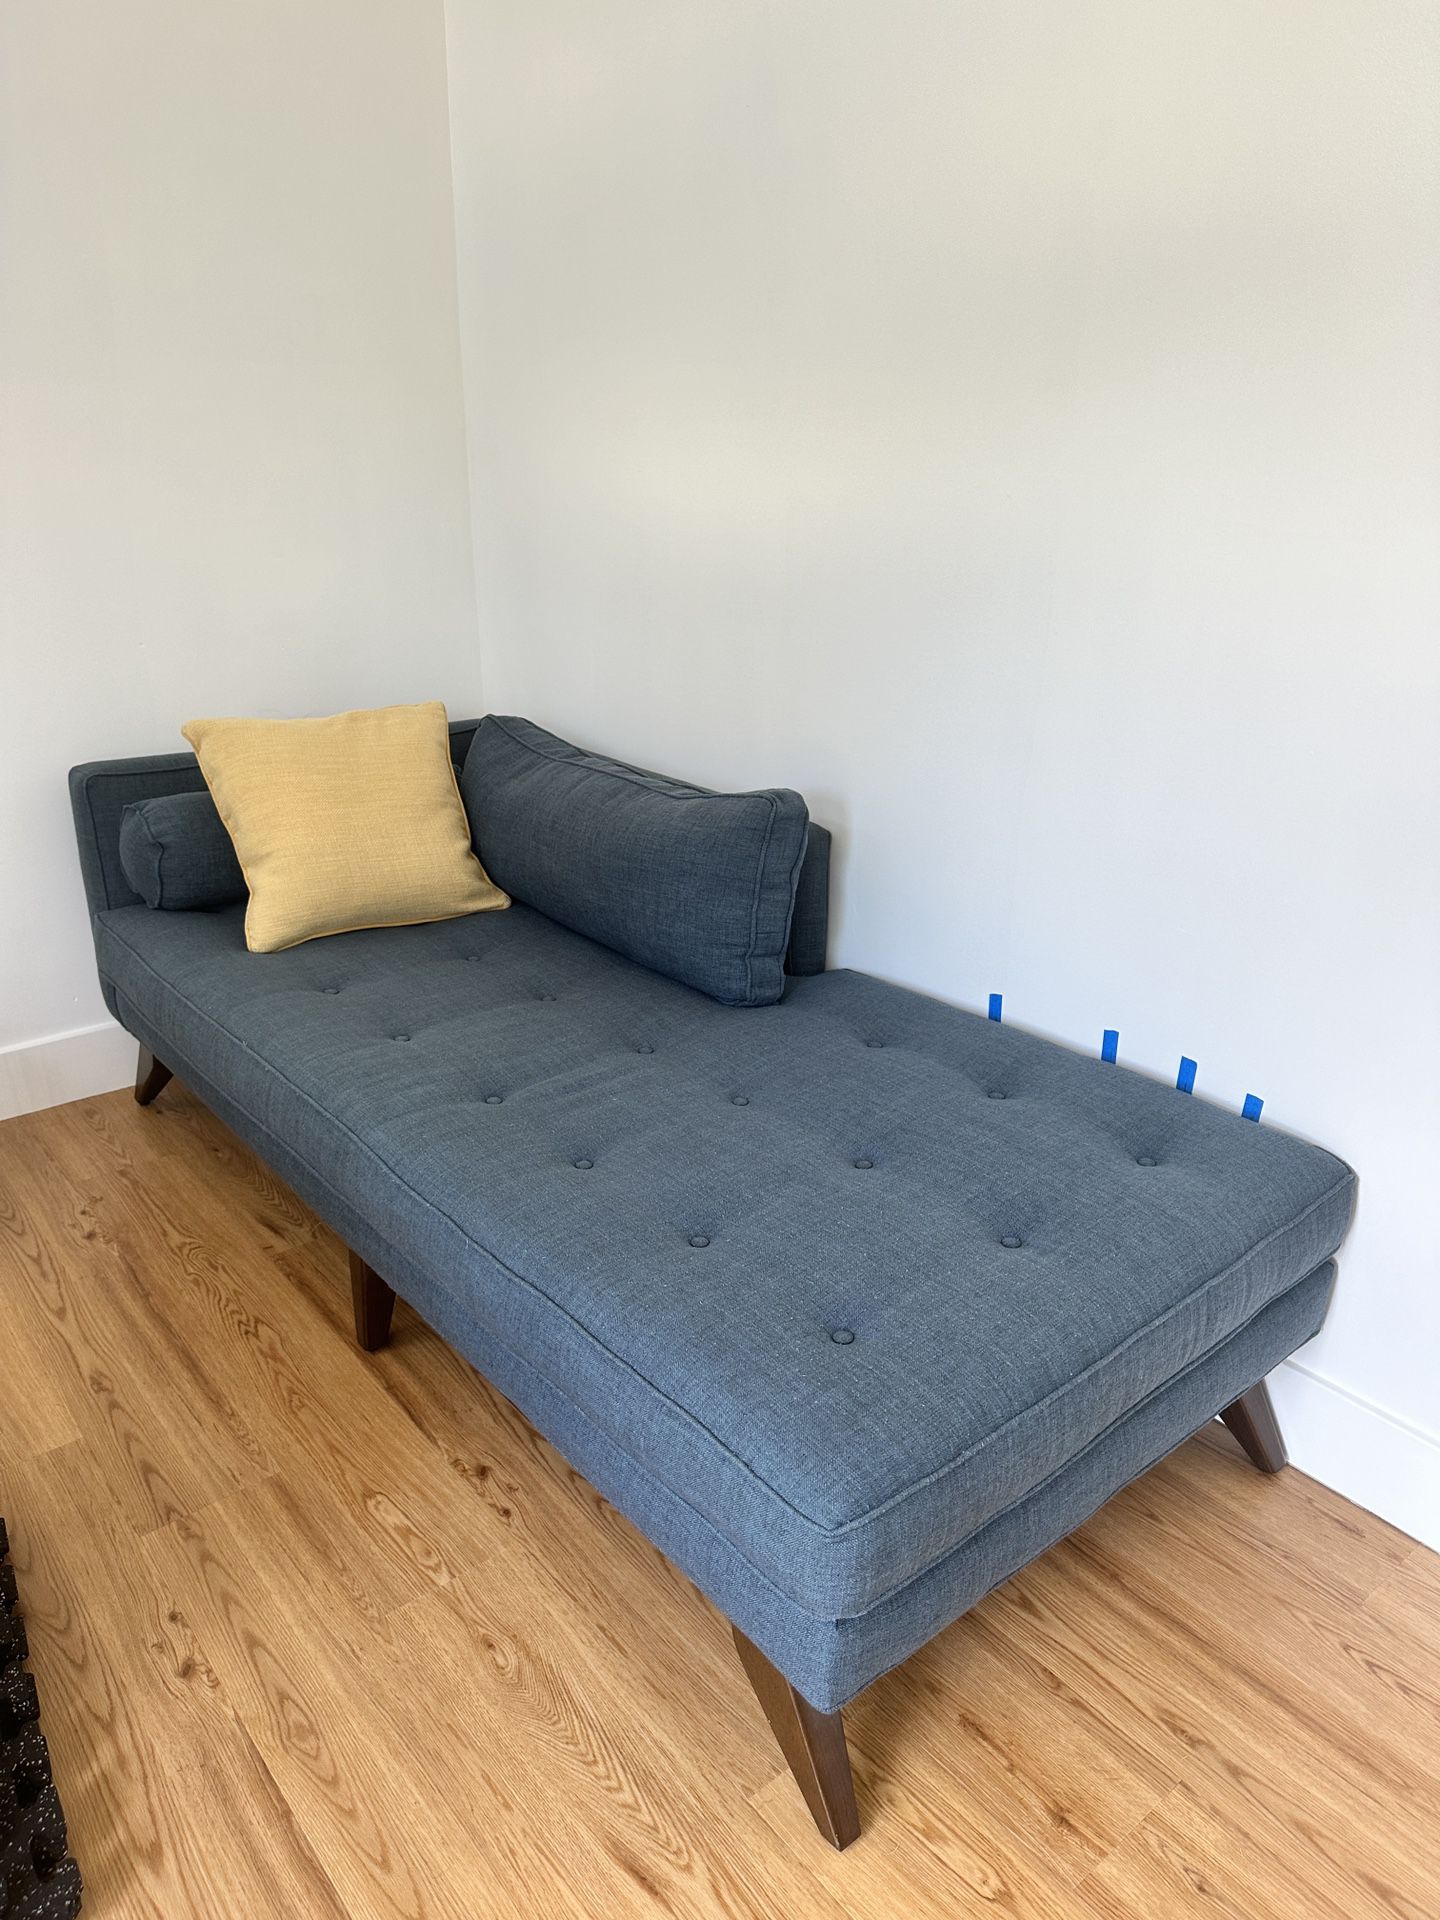 Chaise Lounge Couch - Perfect Condition